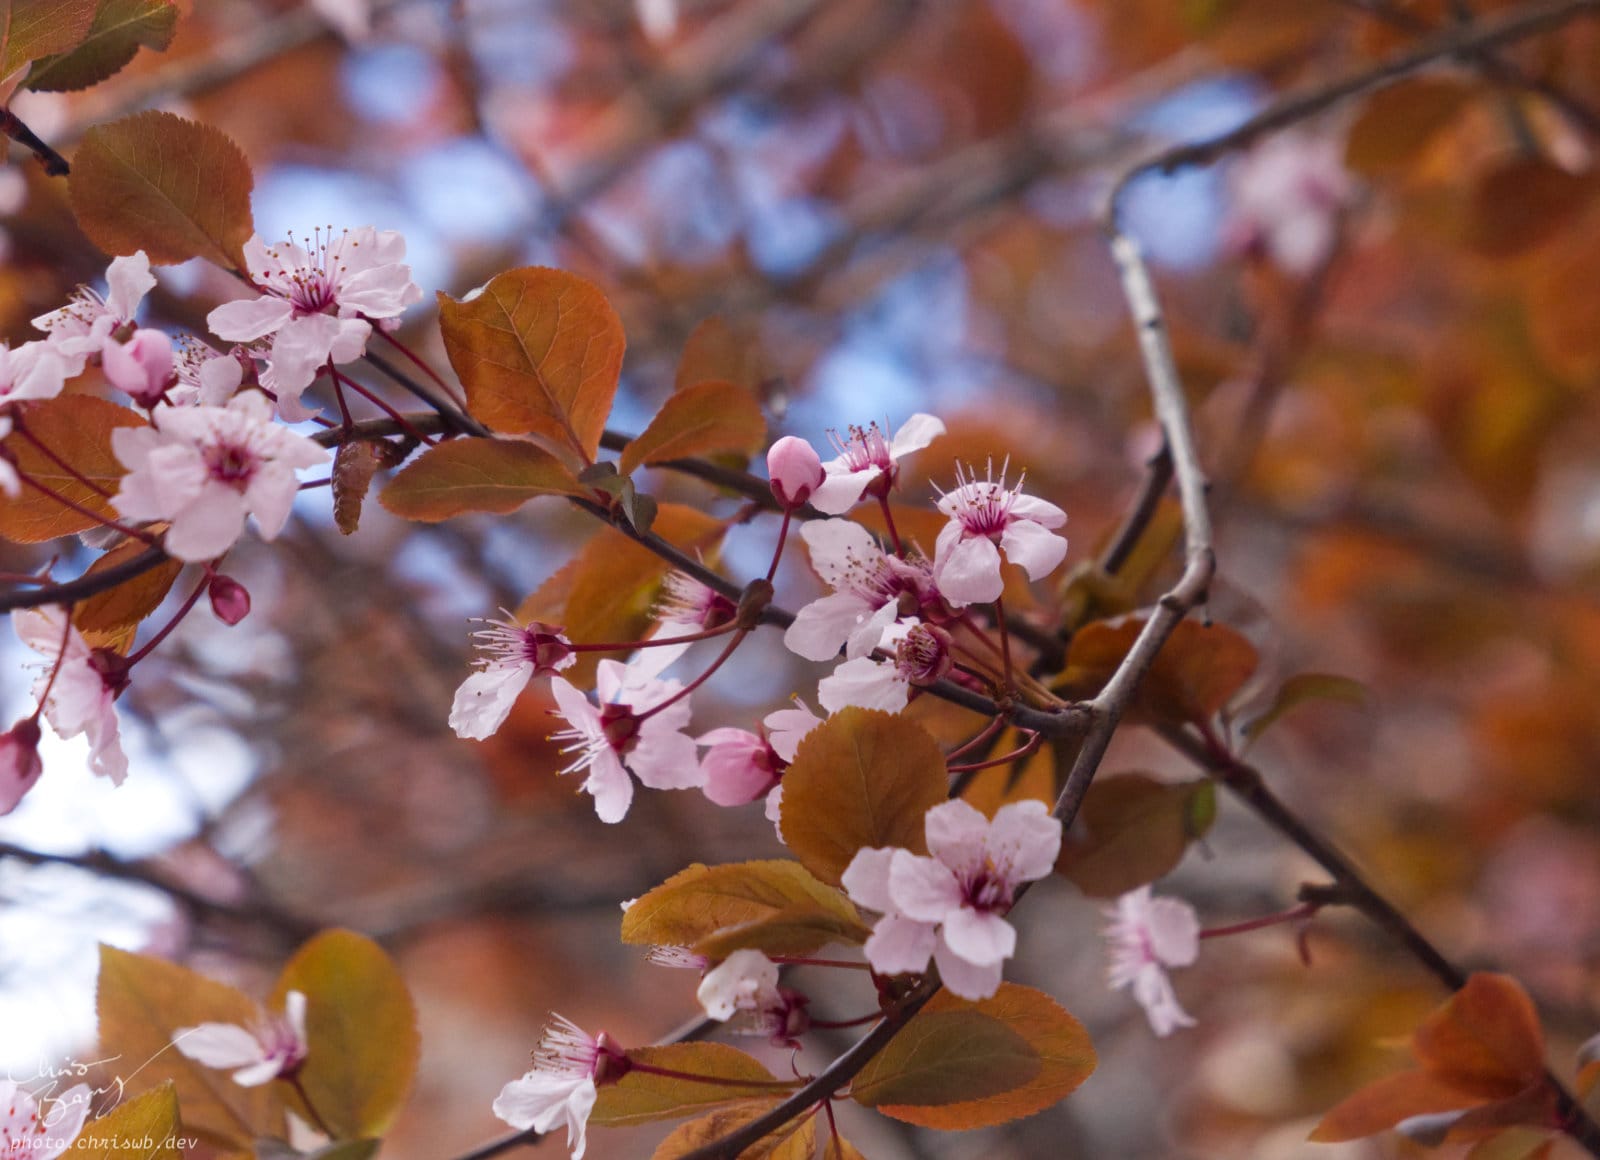 Close up photo of cherry blossoms with a shallow depth of field. The flowers are pink, and the leaves are a reddish brown.